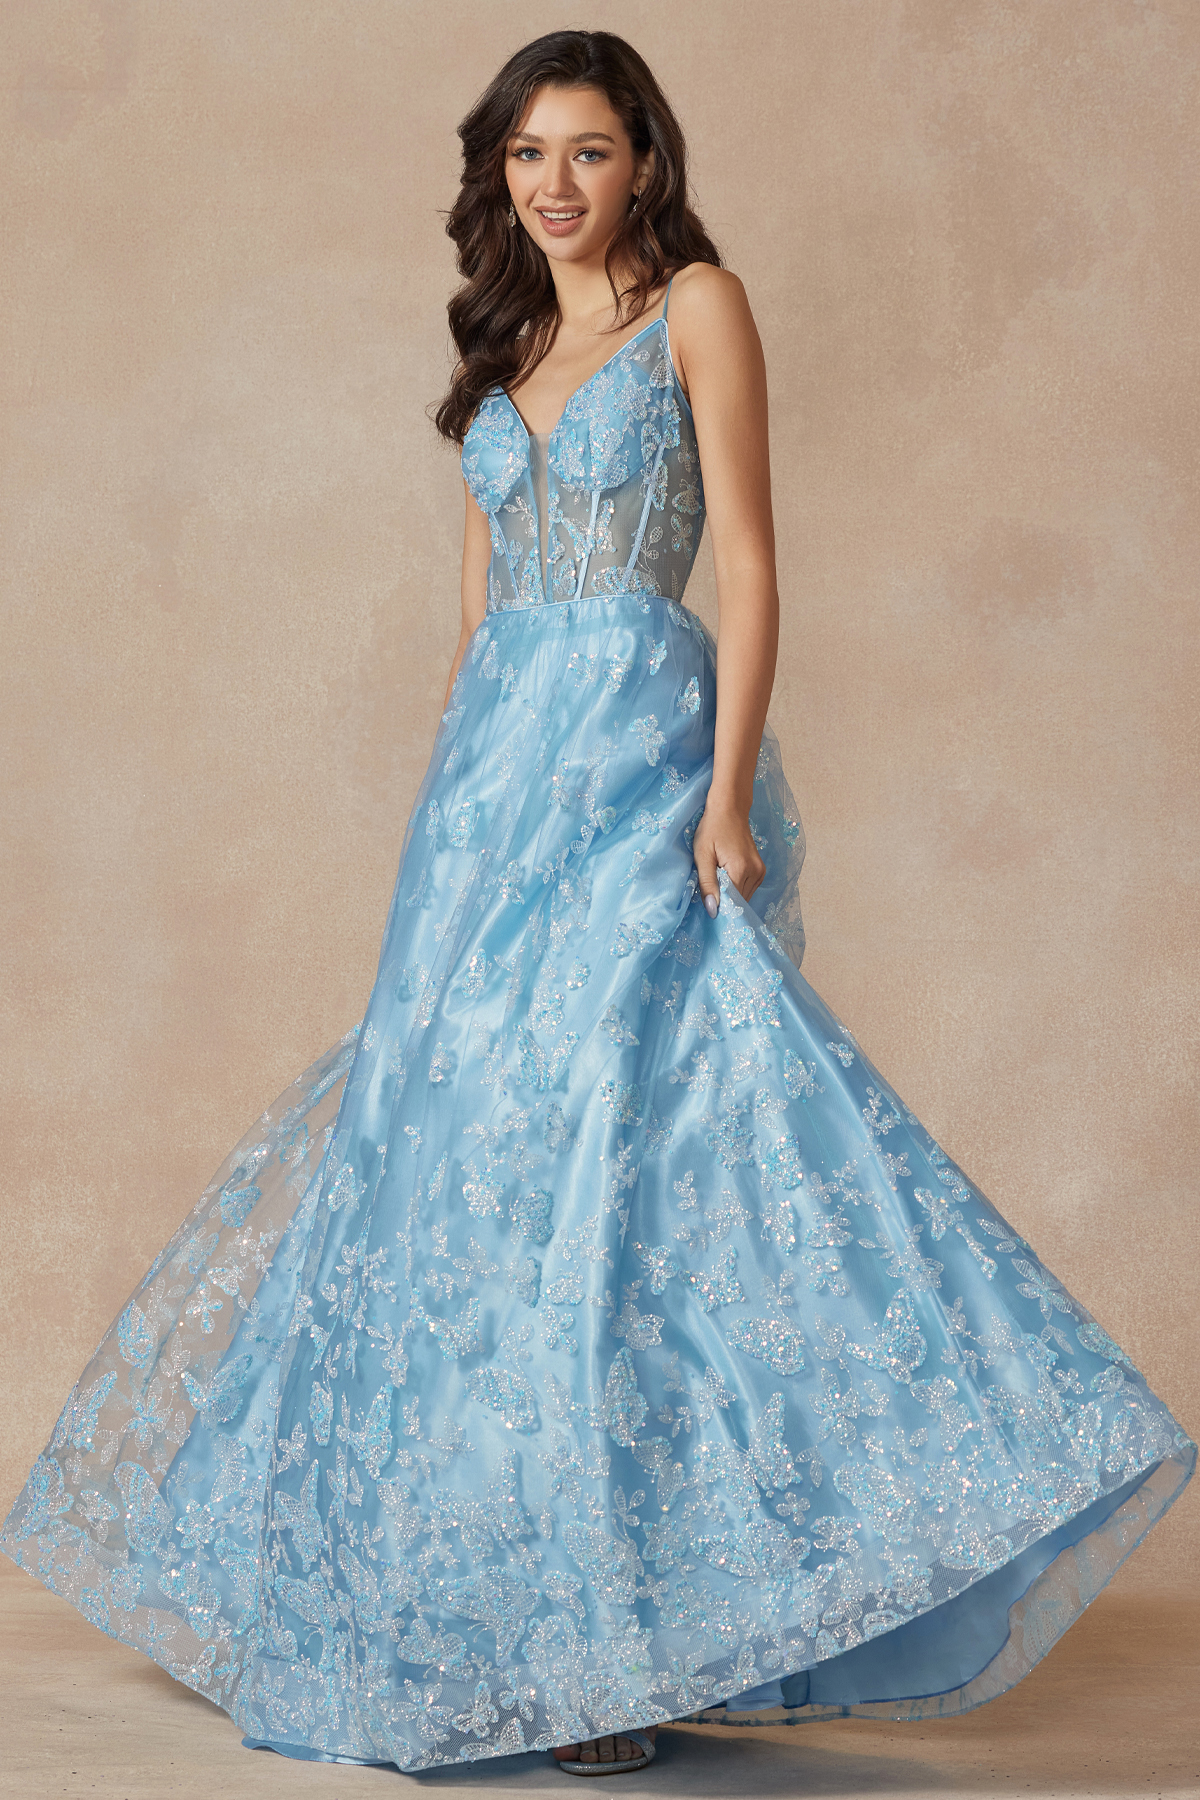  Floral Appliqued Prom Gown